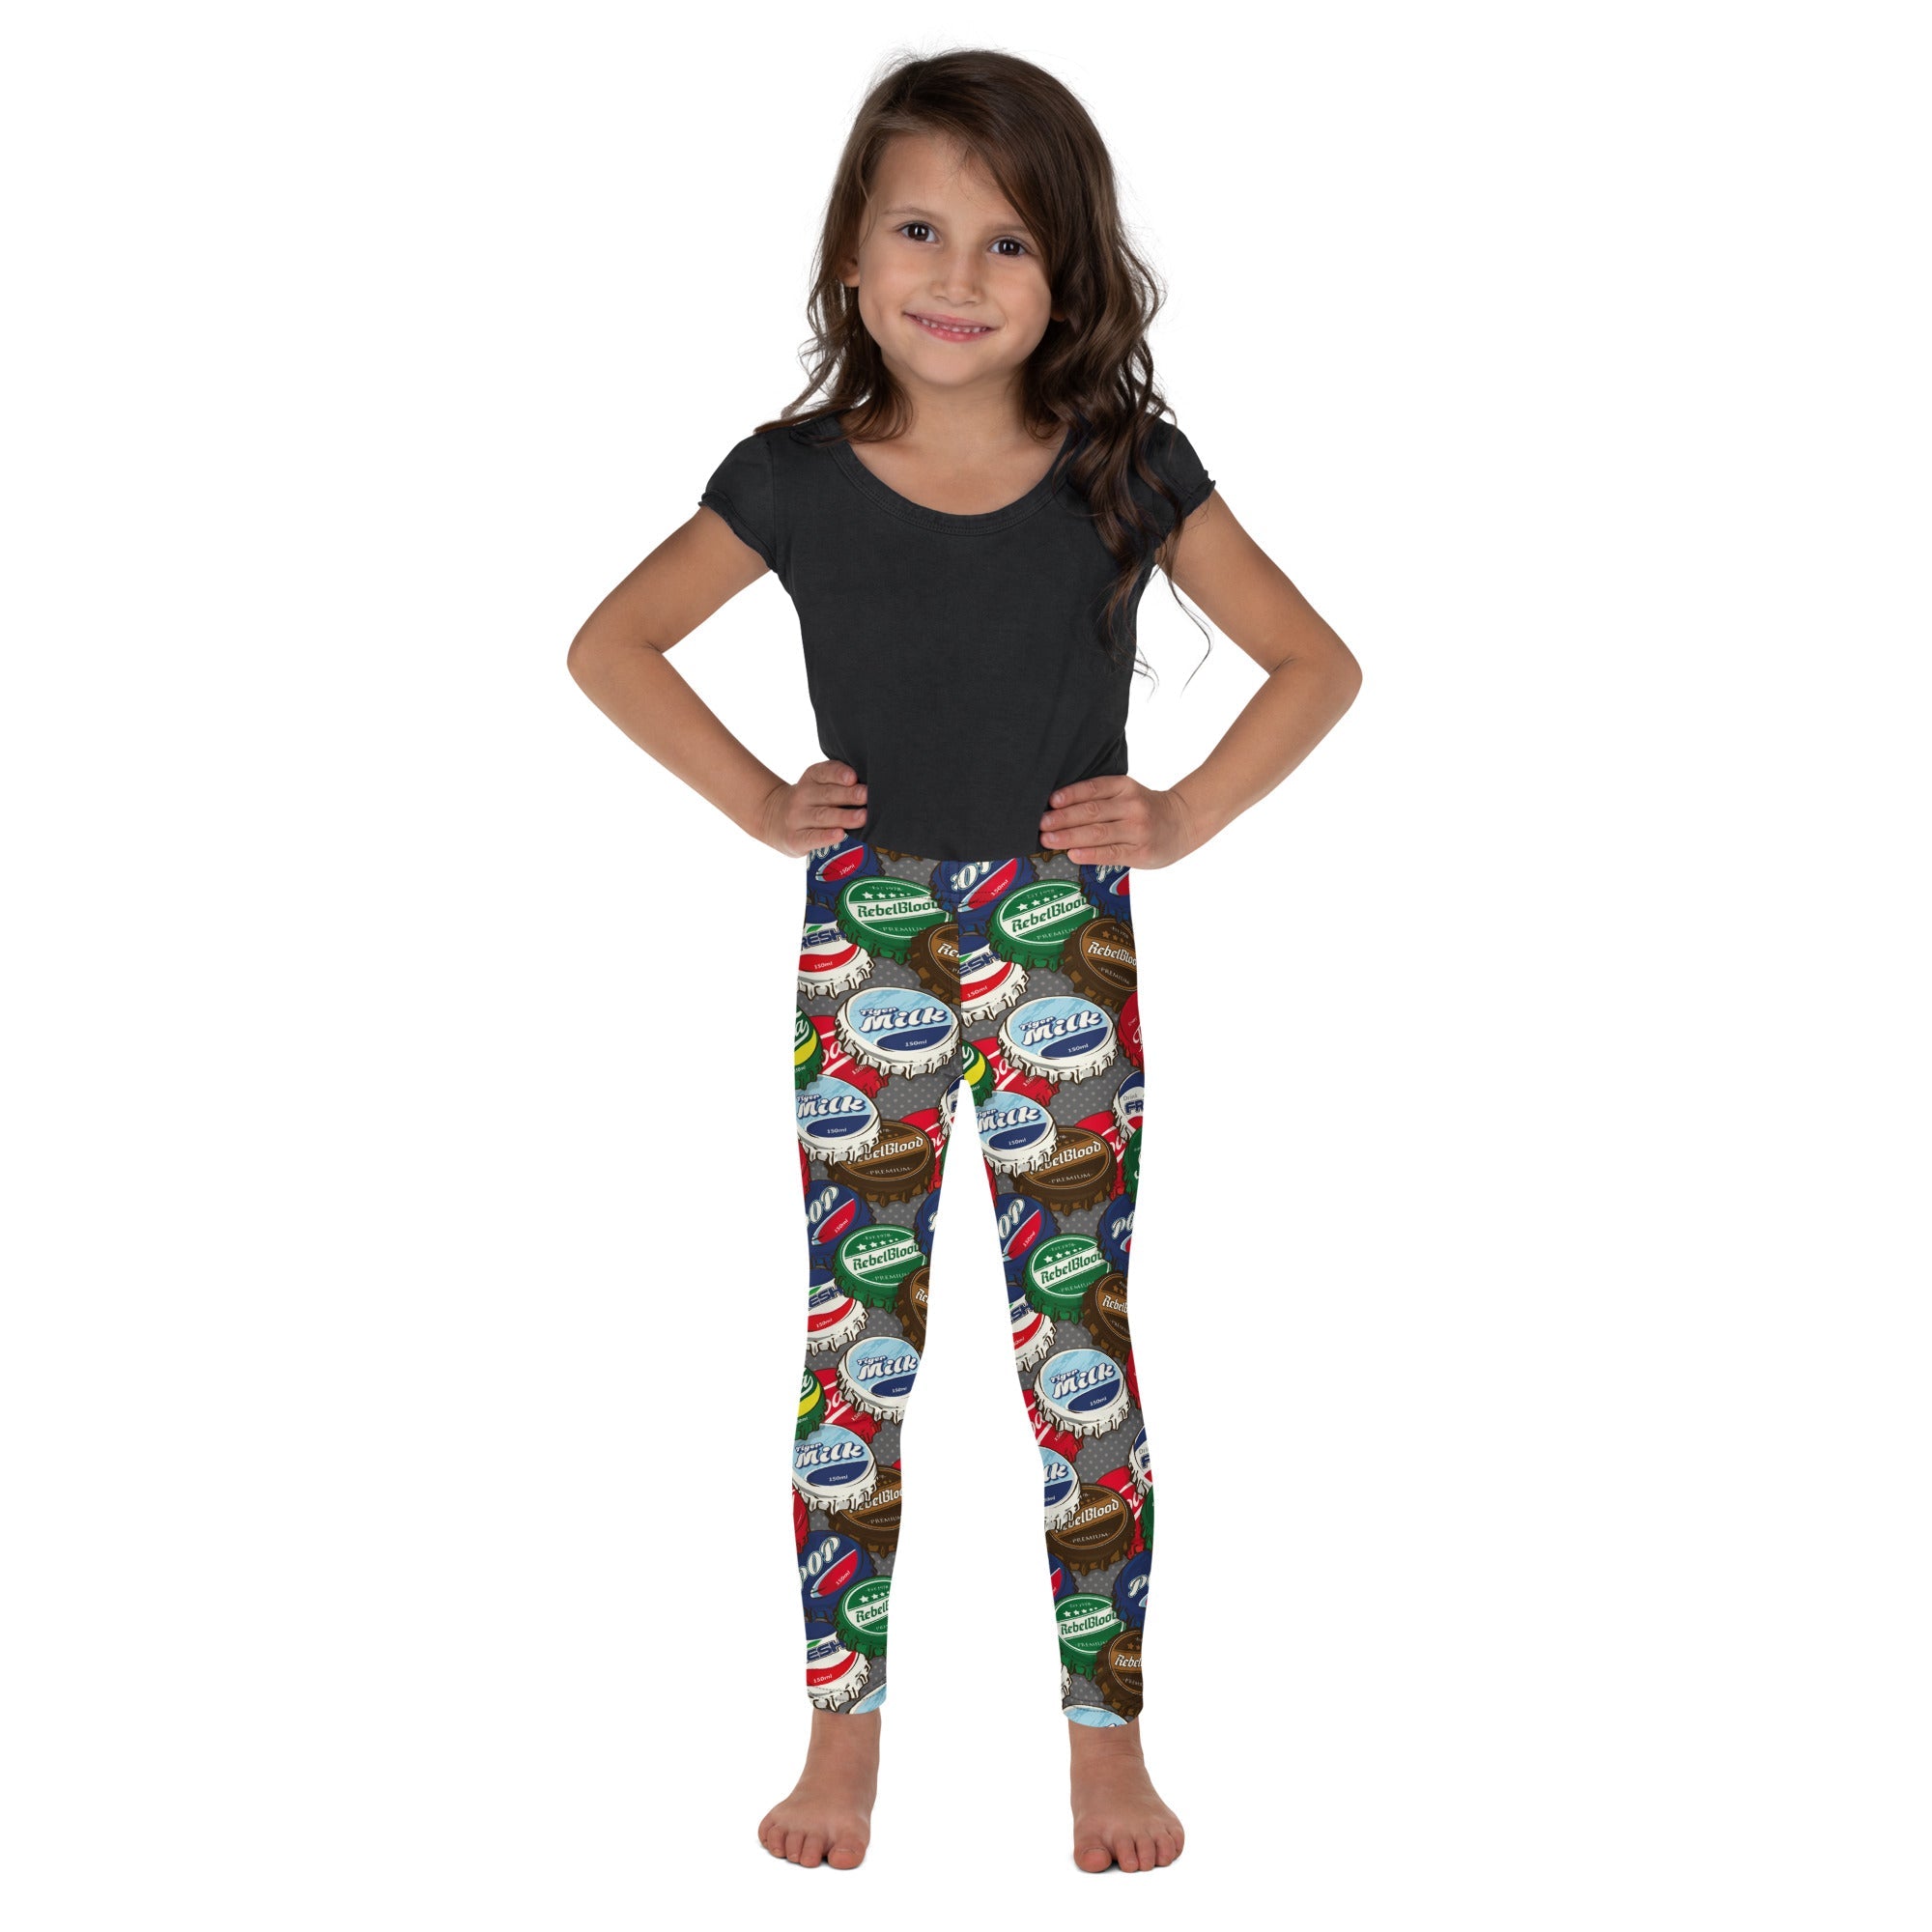 Find Comfy and Adorable Kid's Leggings Online